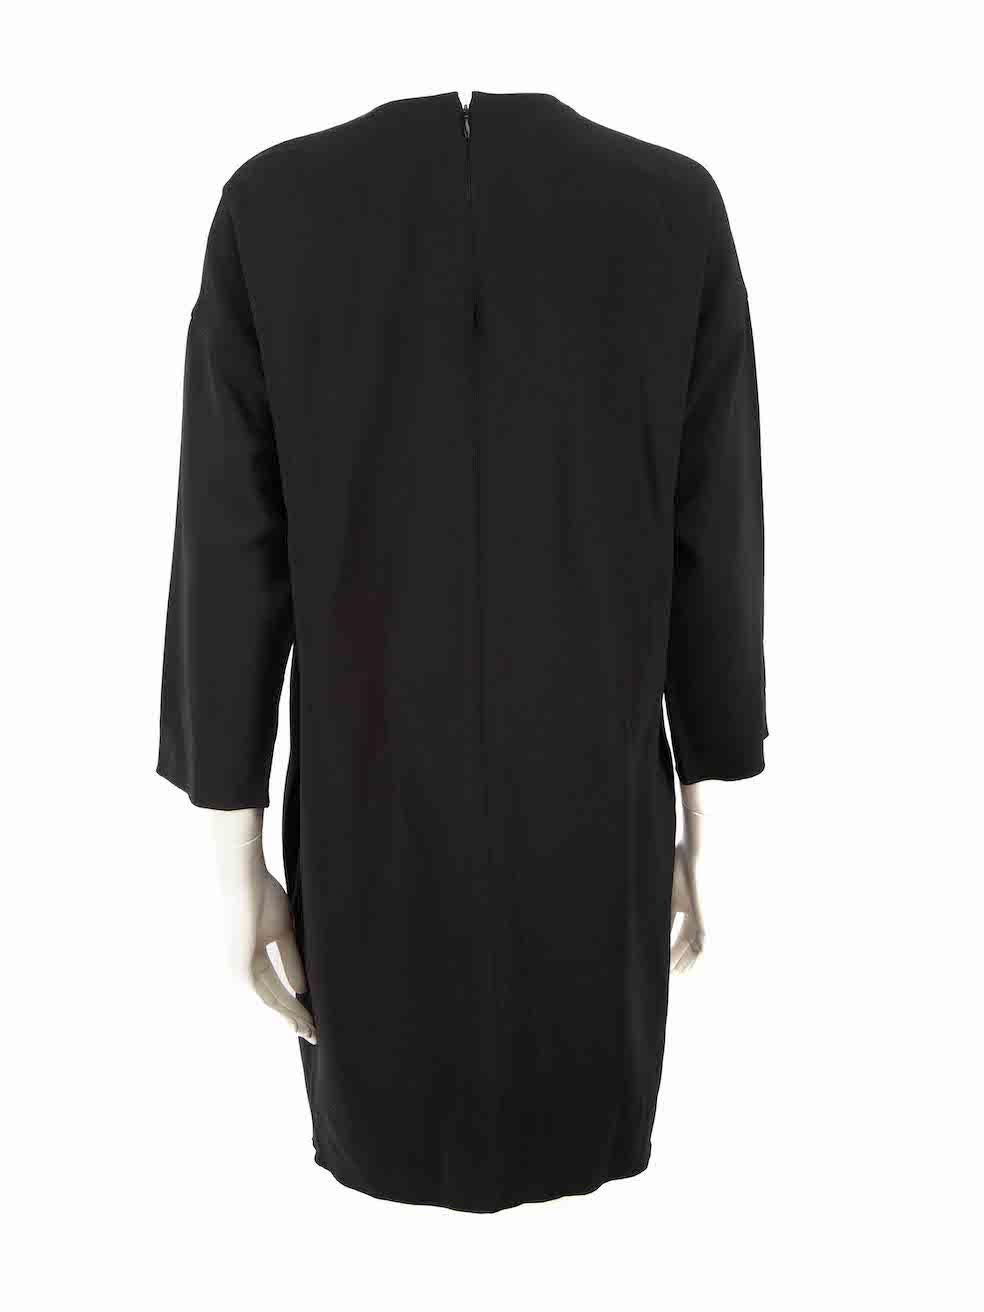 Céline Black Buttoned Shift Knee Length Dress Size L In Excellent Condition For Sale In London, GB